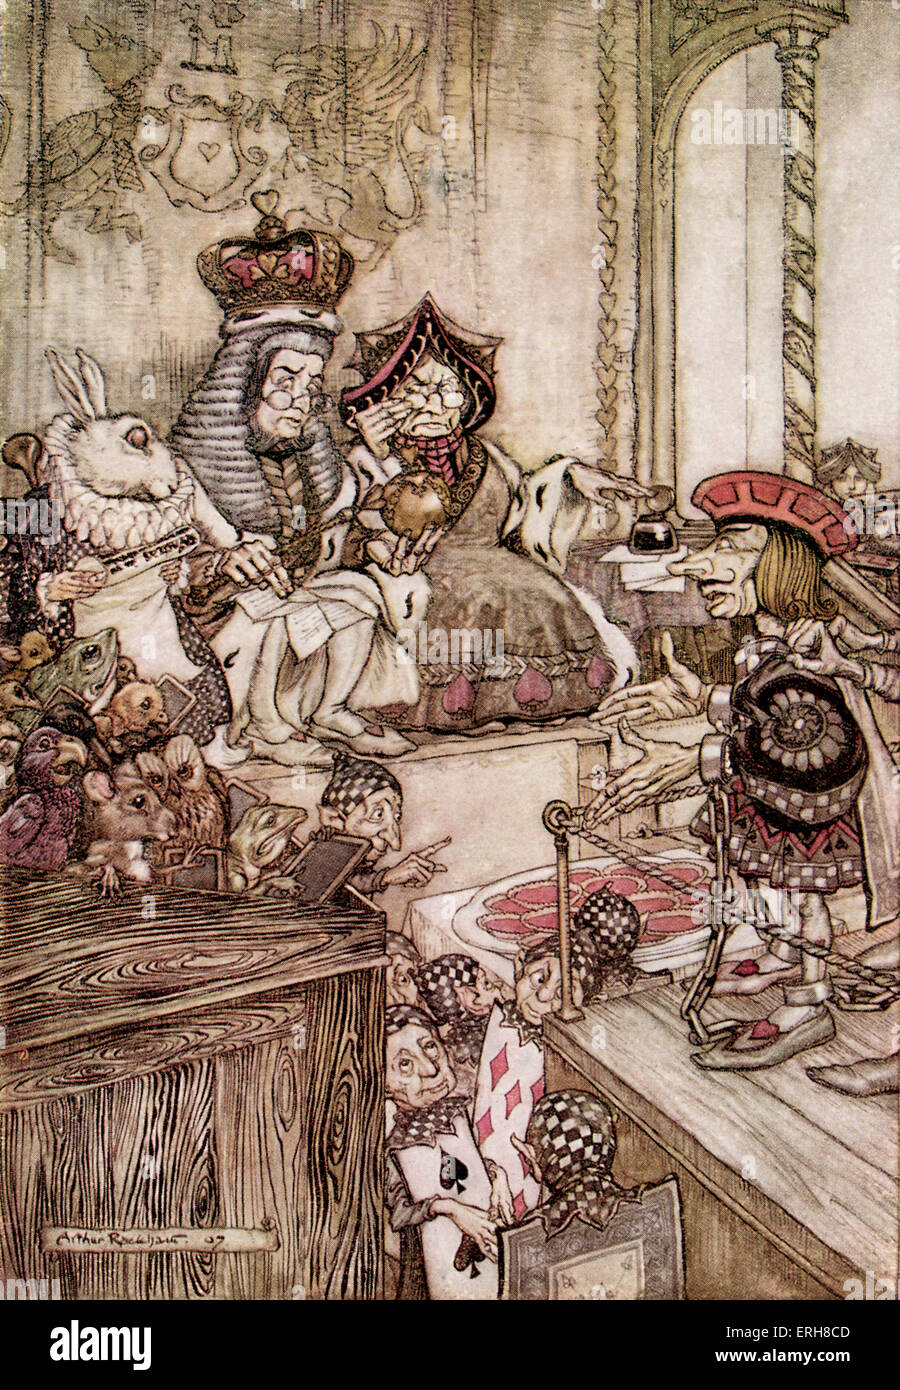 Alice 's Adventures in Wonderland by Lewis Carroll (Charles Lutwidge Dodgson). Caption reads:'Who stole the tarts?' (Chapter 11- the trial). Illustration by Arthur Rackham. (First published 1865). LC: English children's writer and mathematician 27 January 1832- 14 January 1898. AR: 1867 -1939 (Real name Reverend Charles Lutwidge Dodgson) English author: 27 January 1832 - 14 January 1898. Stock Photo